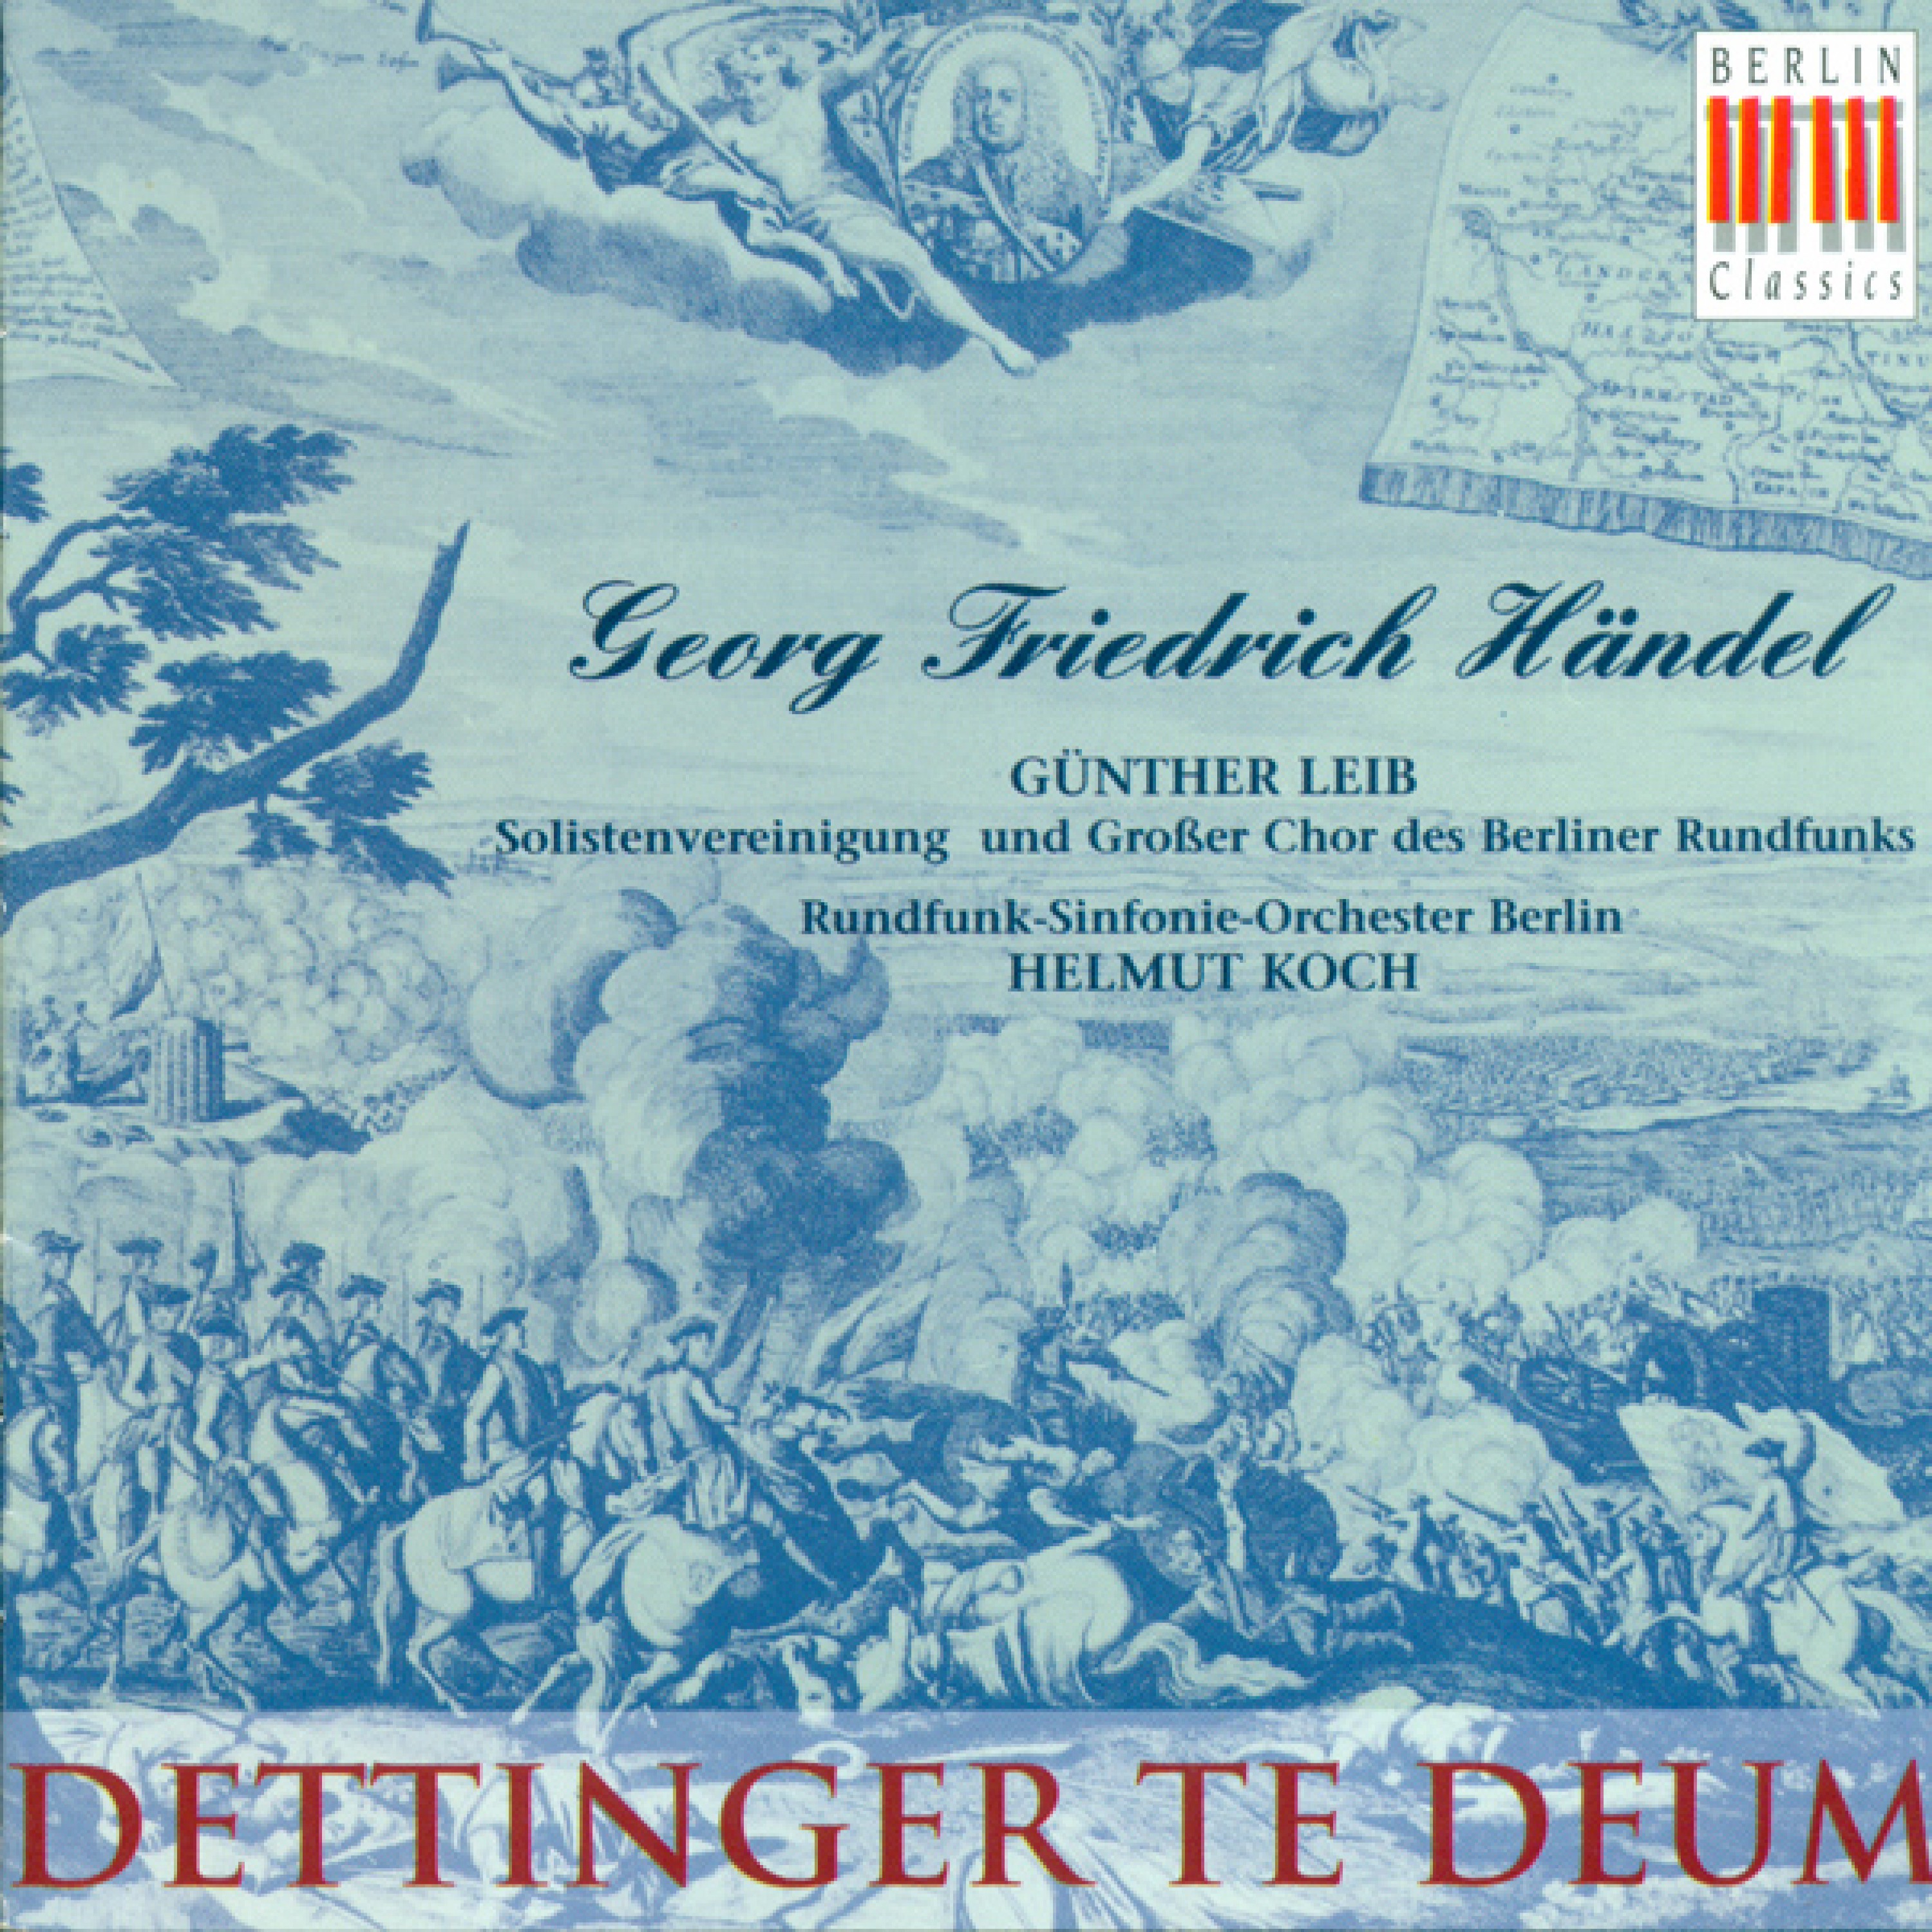 Te Deum in D major, HWV 283, "Dettingen": Thou sittest at the right hand of God